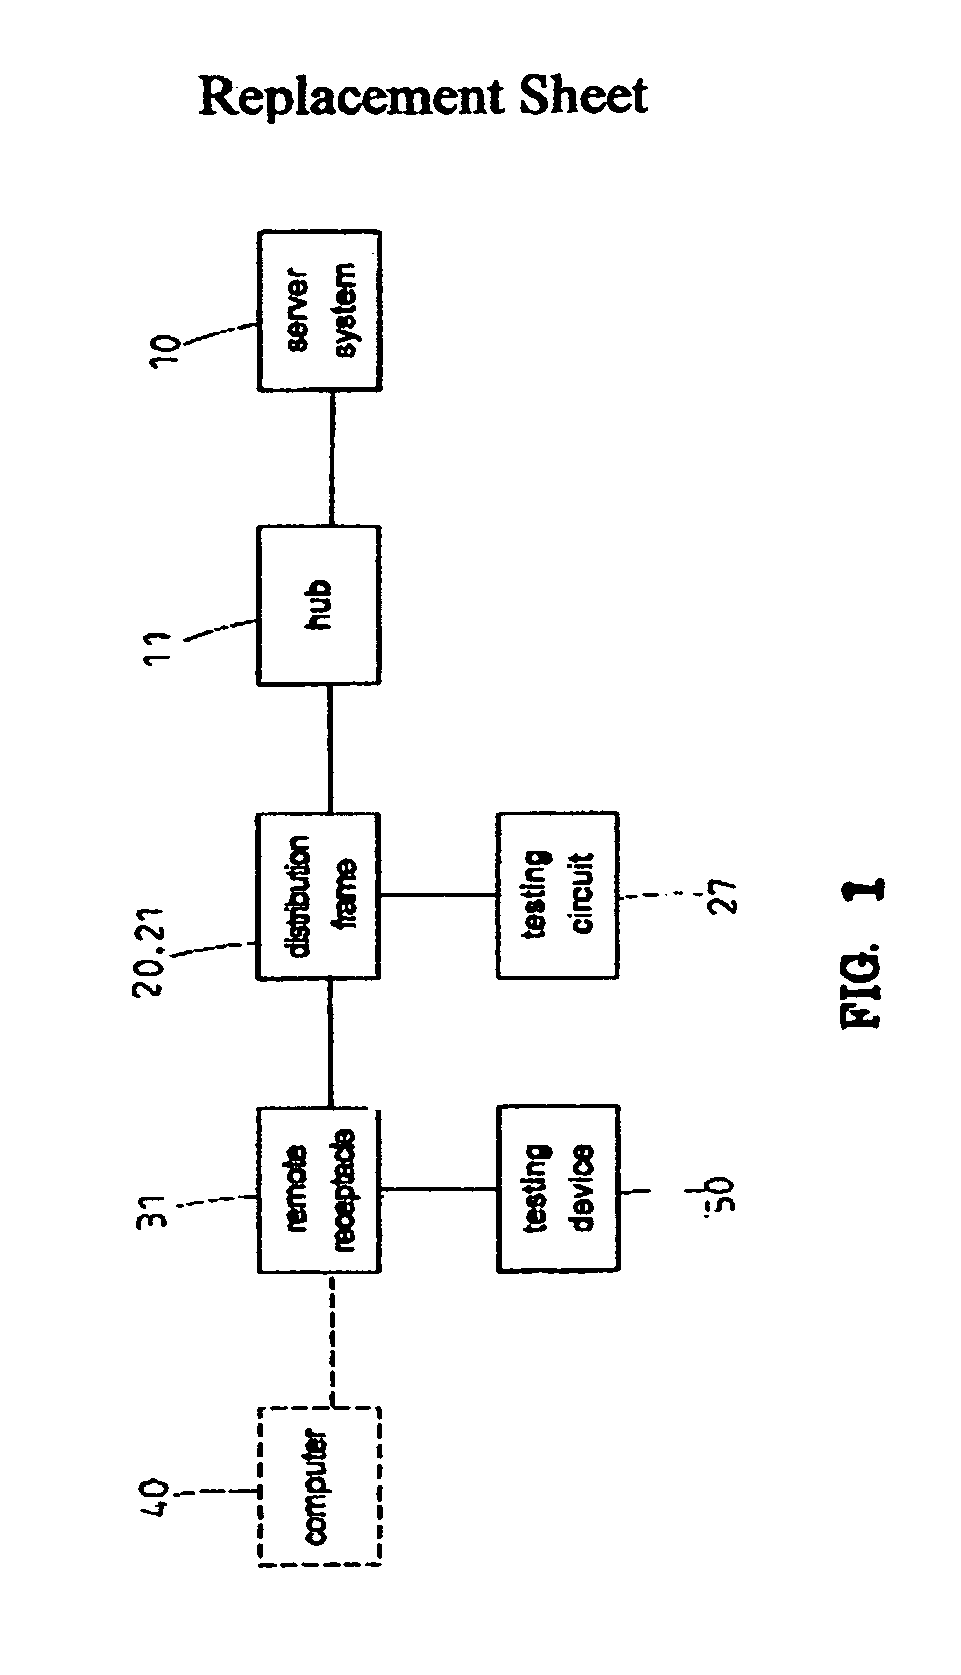 Group wiring system allowing locating of wire pairs and method for locating wire pairs in group wiring system